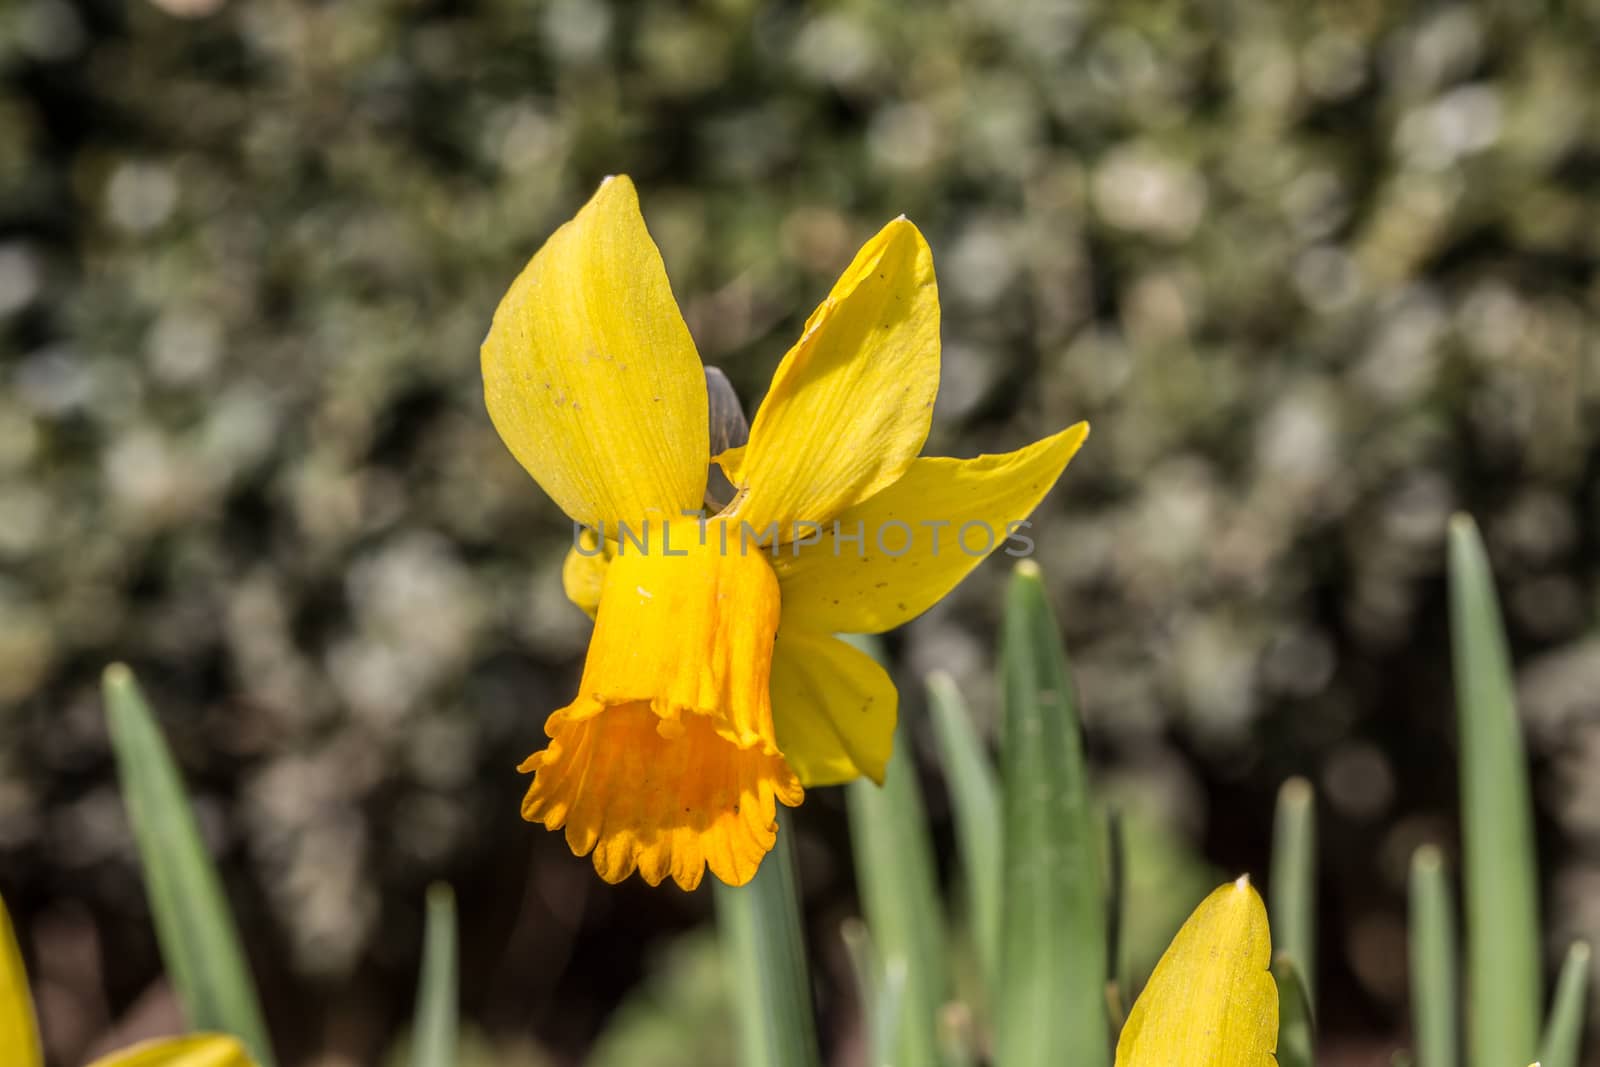 yellow daffodils or daffodils in spring by Dr-Lange